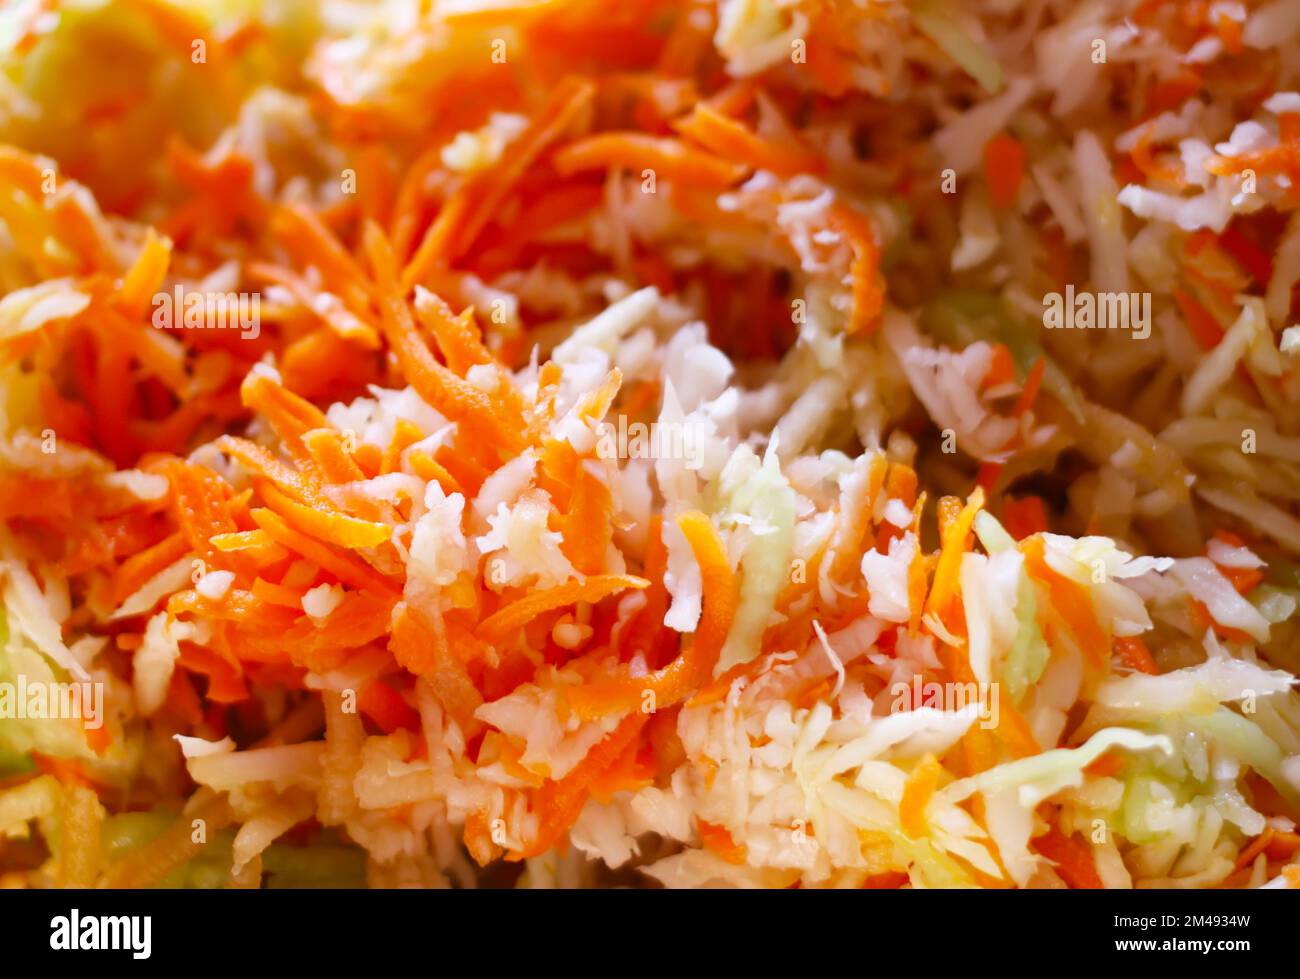 Fresh vegetable sald. Healthy food. Cabbage and carrots Stock Photo